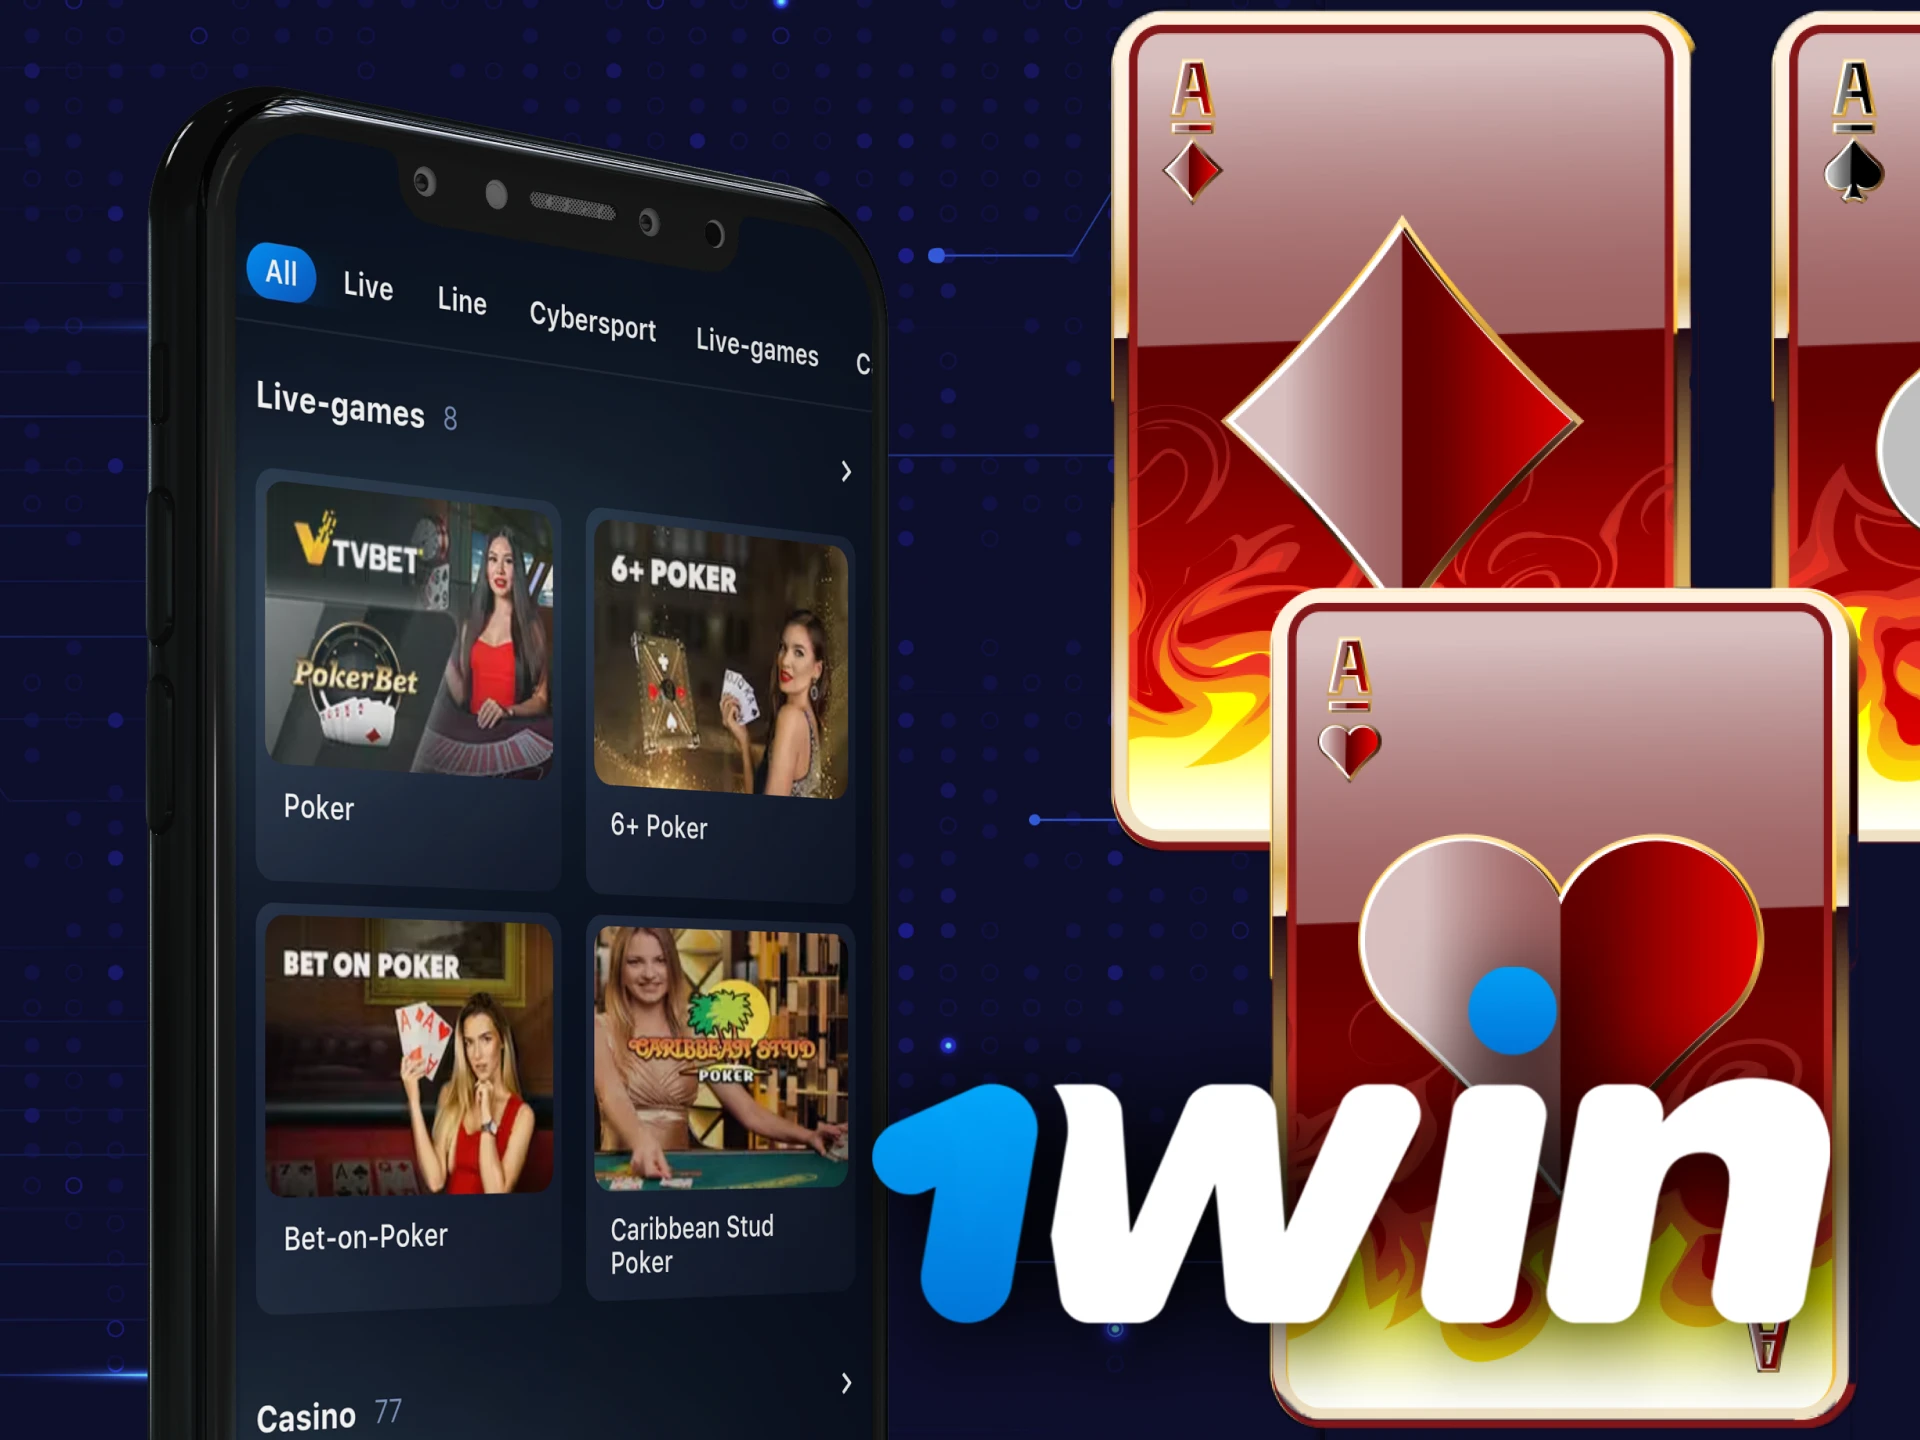 Download and install the 1win Android app.